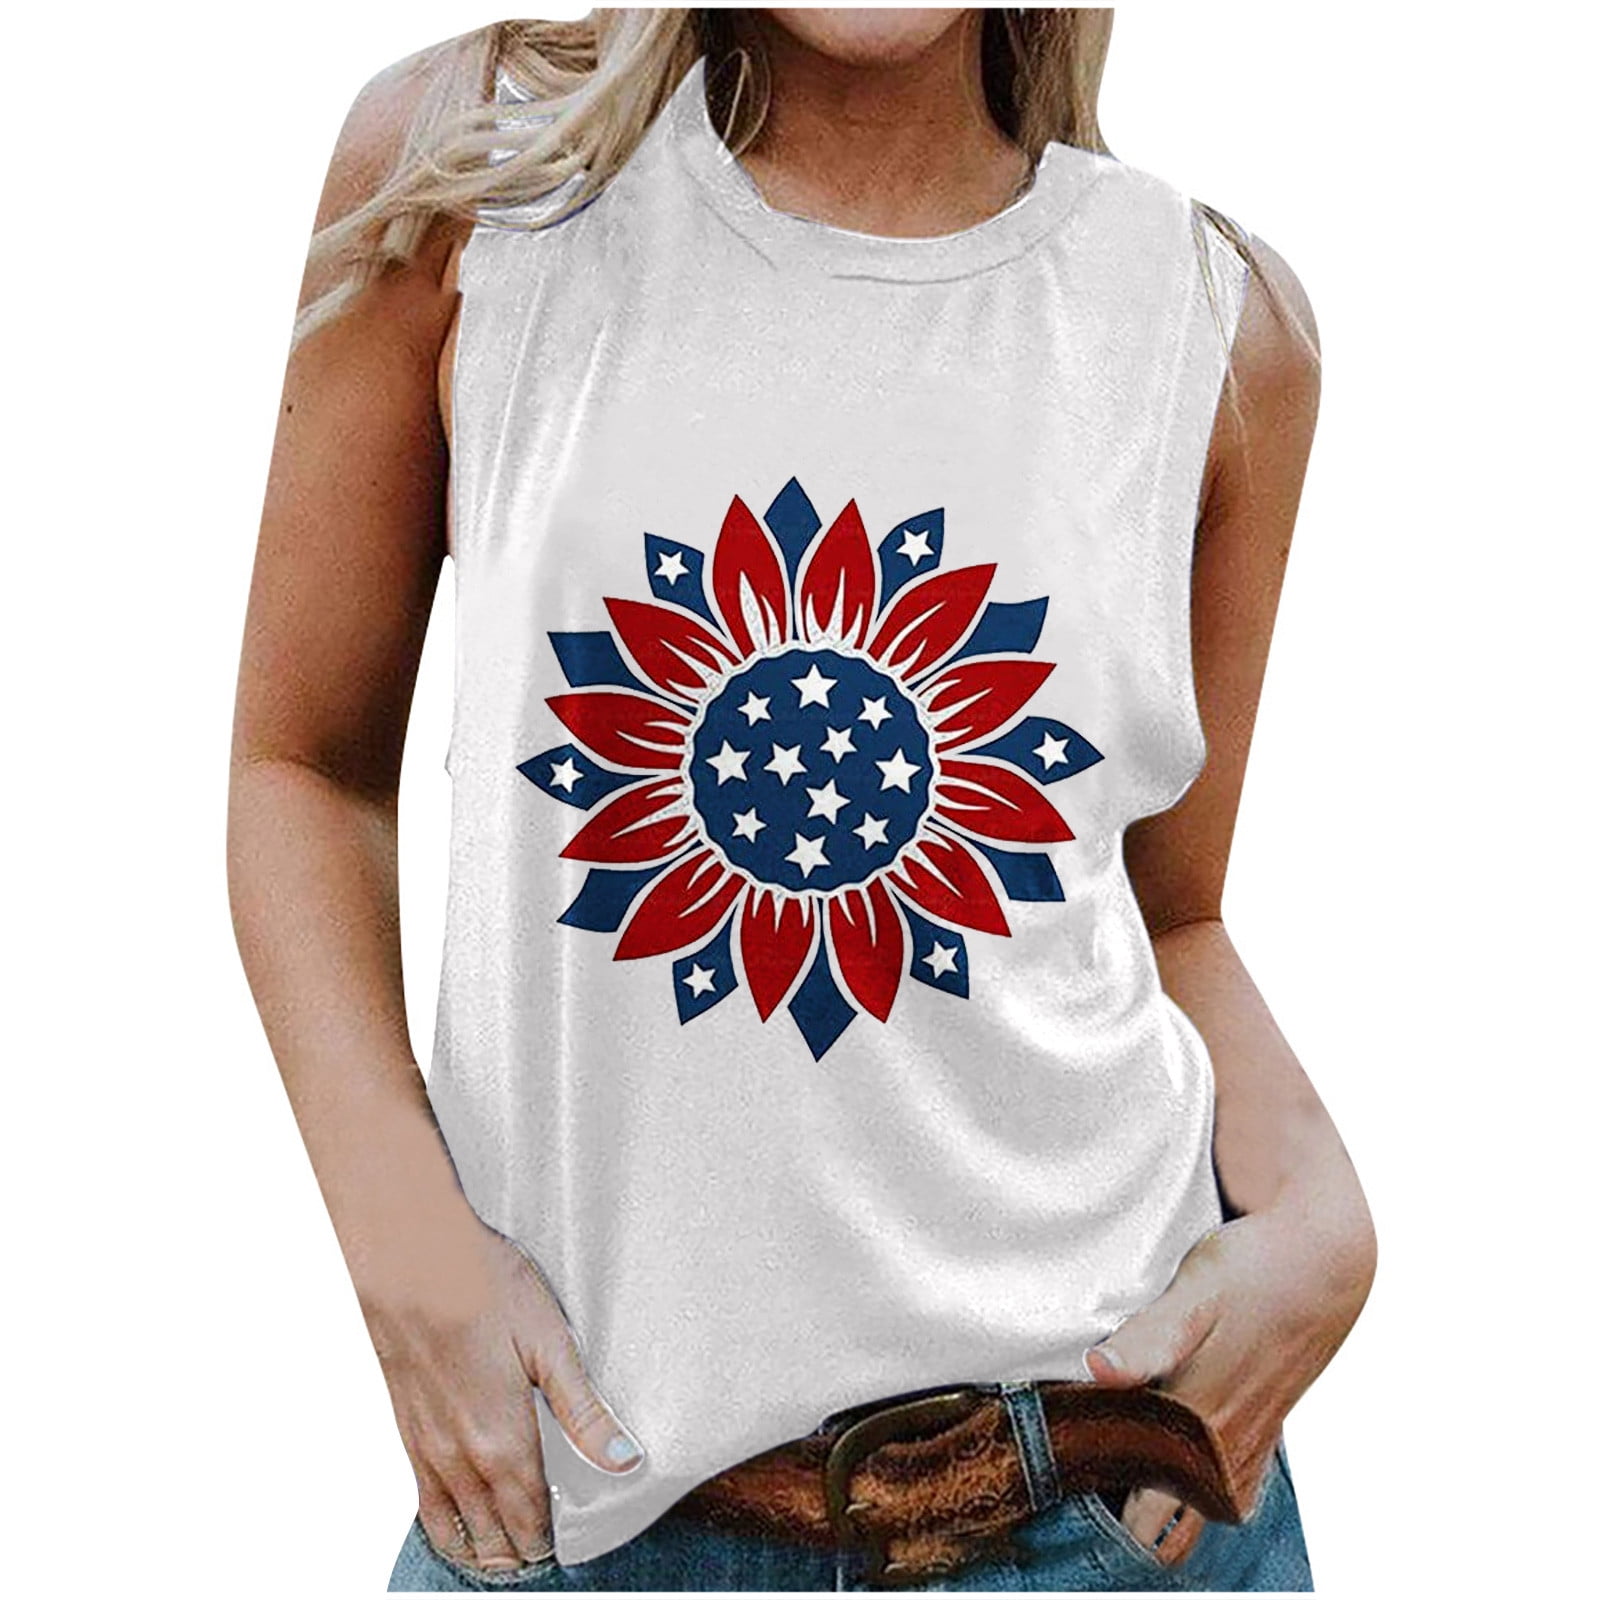 Womens 4th of July Summer Tops Short Sleeve American Flag Shirt Casual Loose Sunflower Tank Tops Tees Womens Shirts 